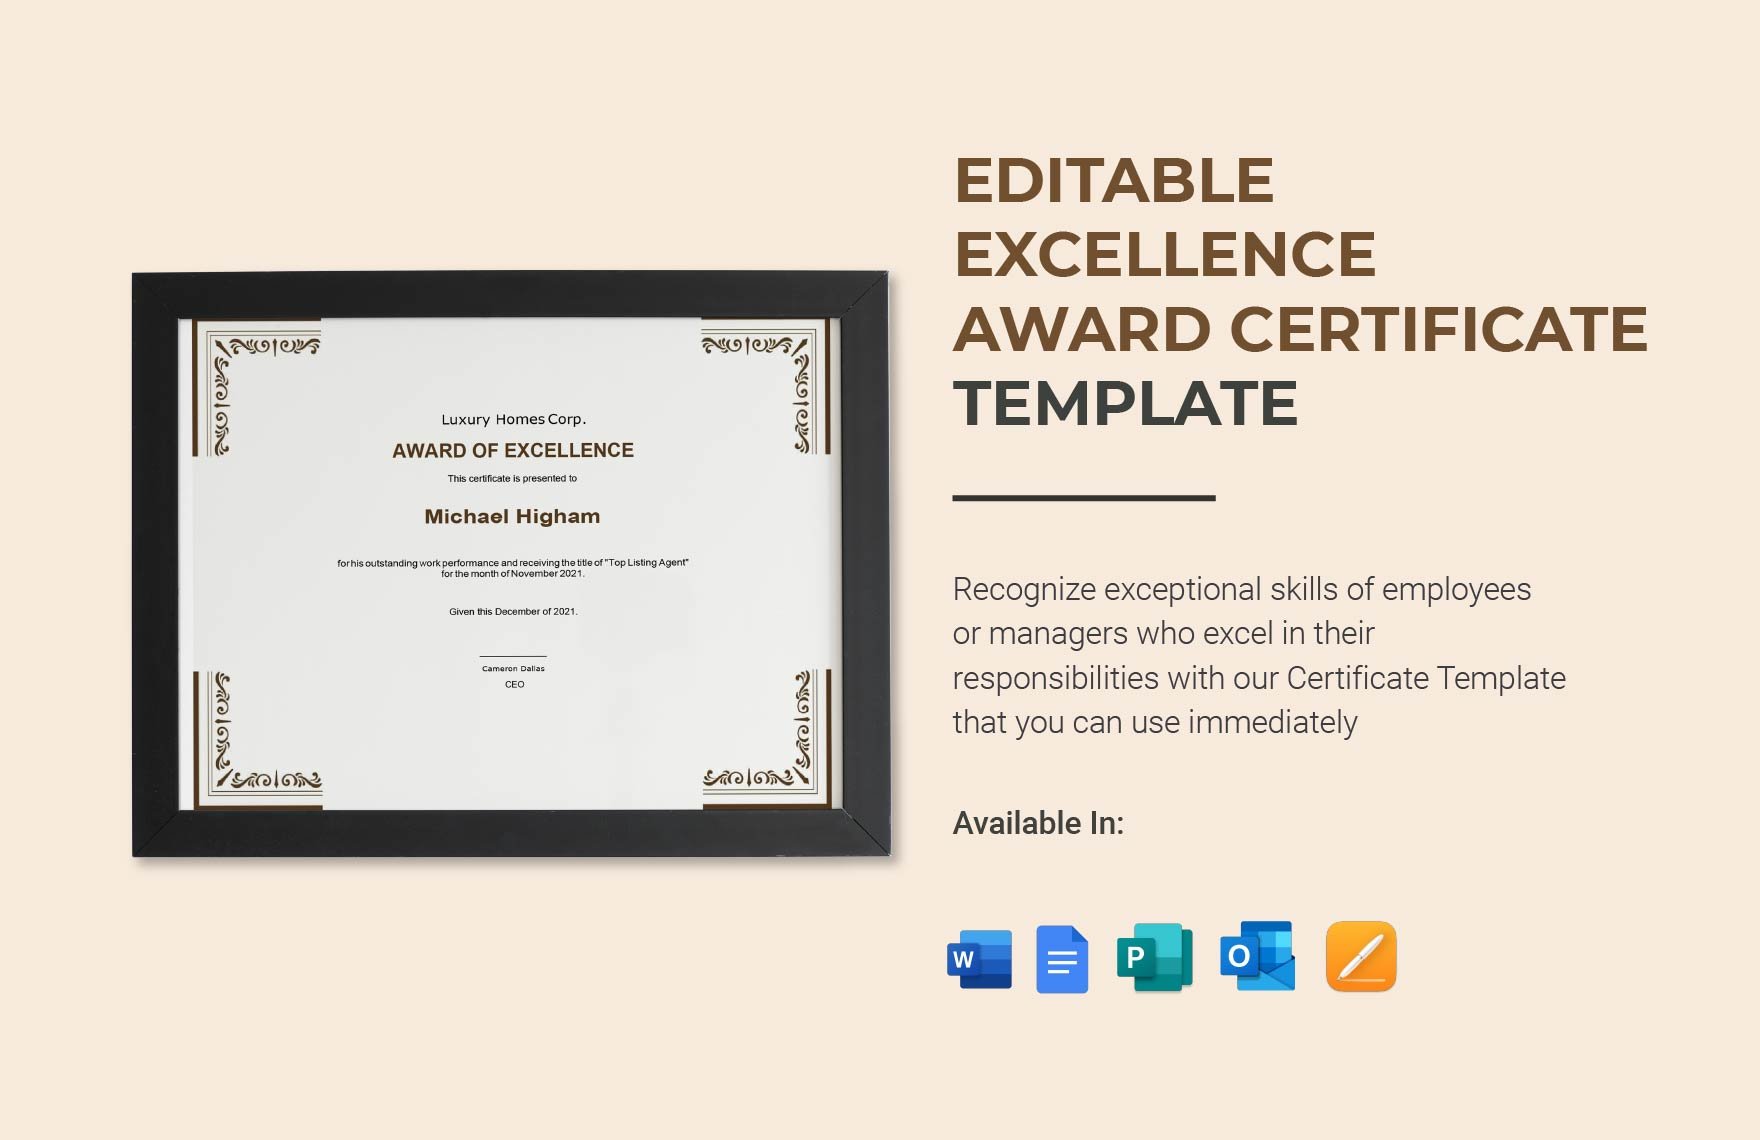 Editable Excellence Award Certificate Template